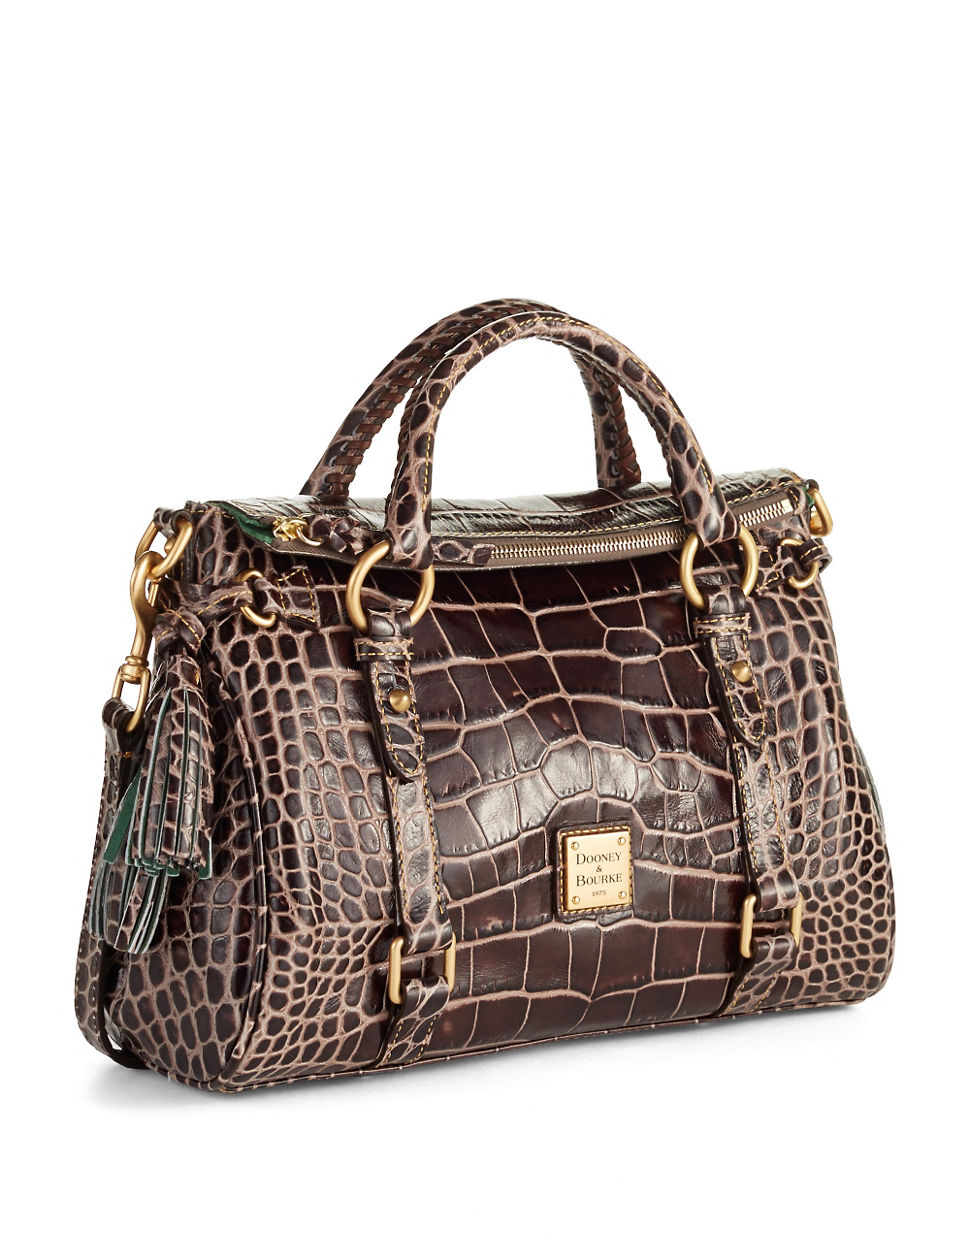 Dooney & Bourke Croc-embossed Small Leather Satchel Bag in Taupe (Gray) - Lyst